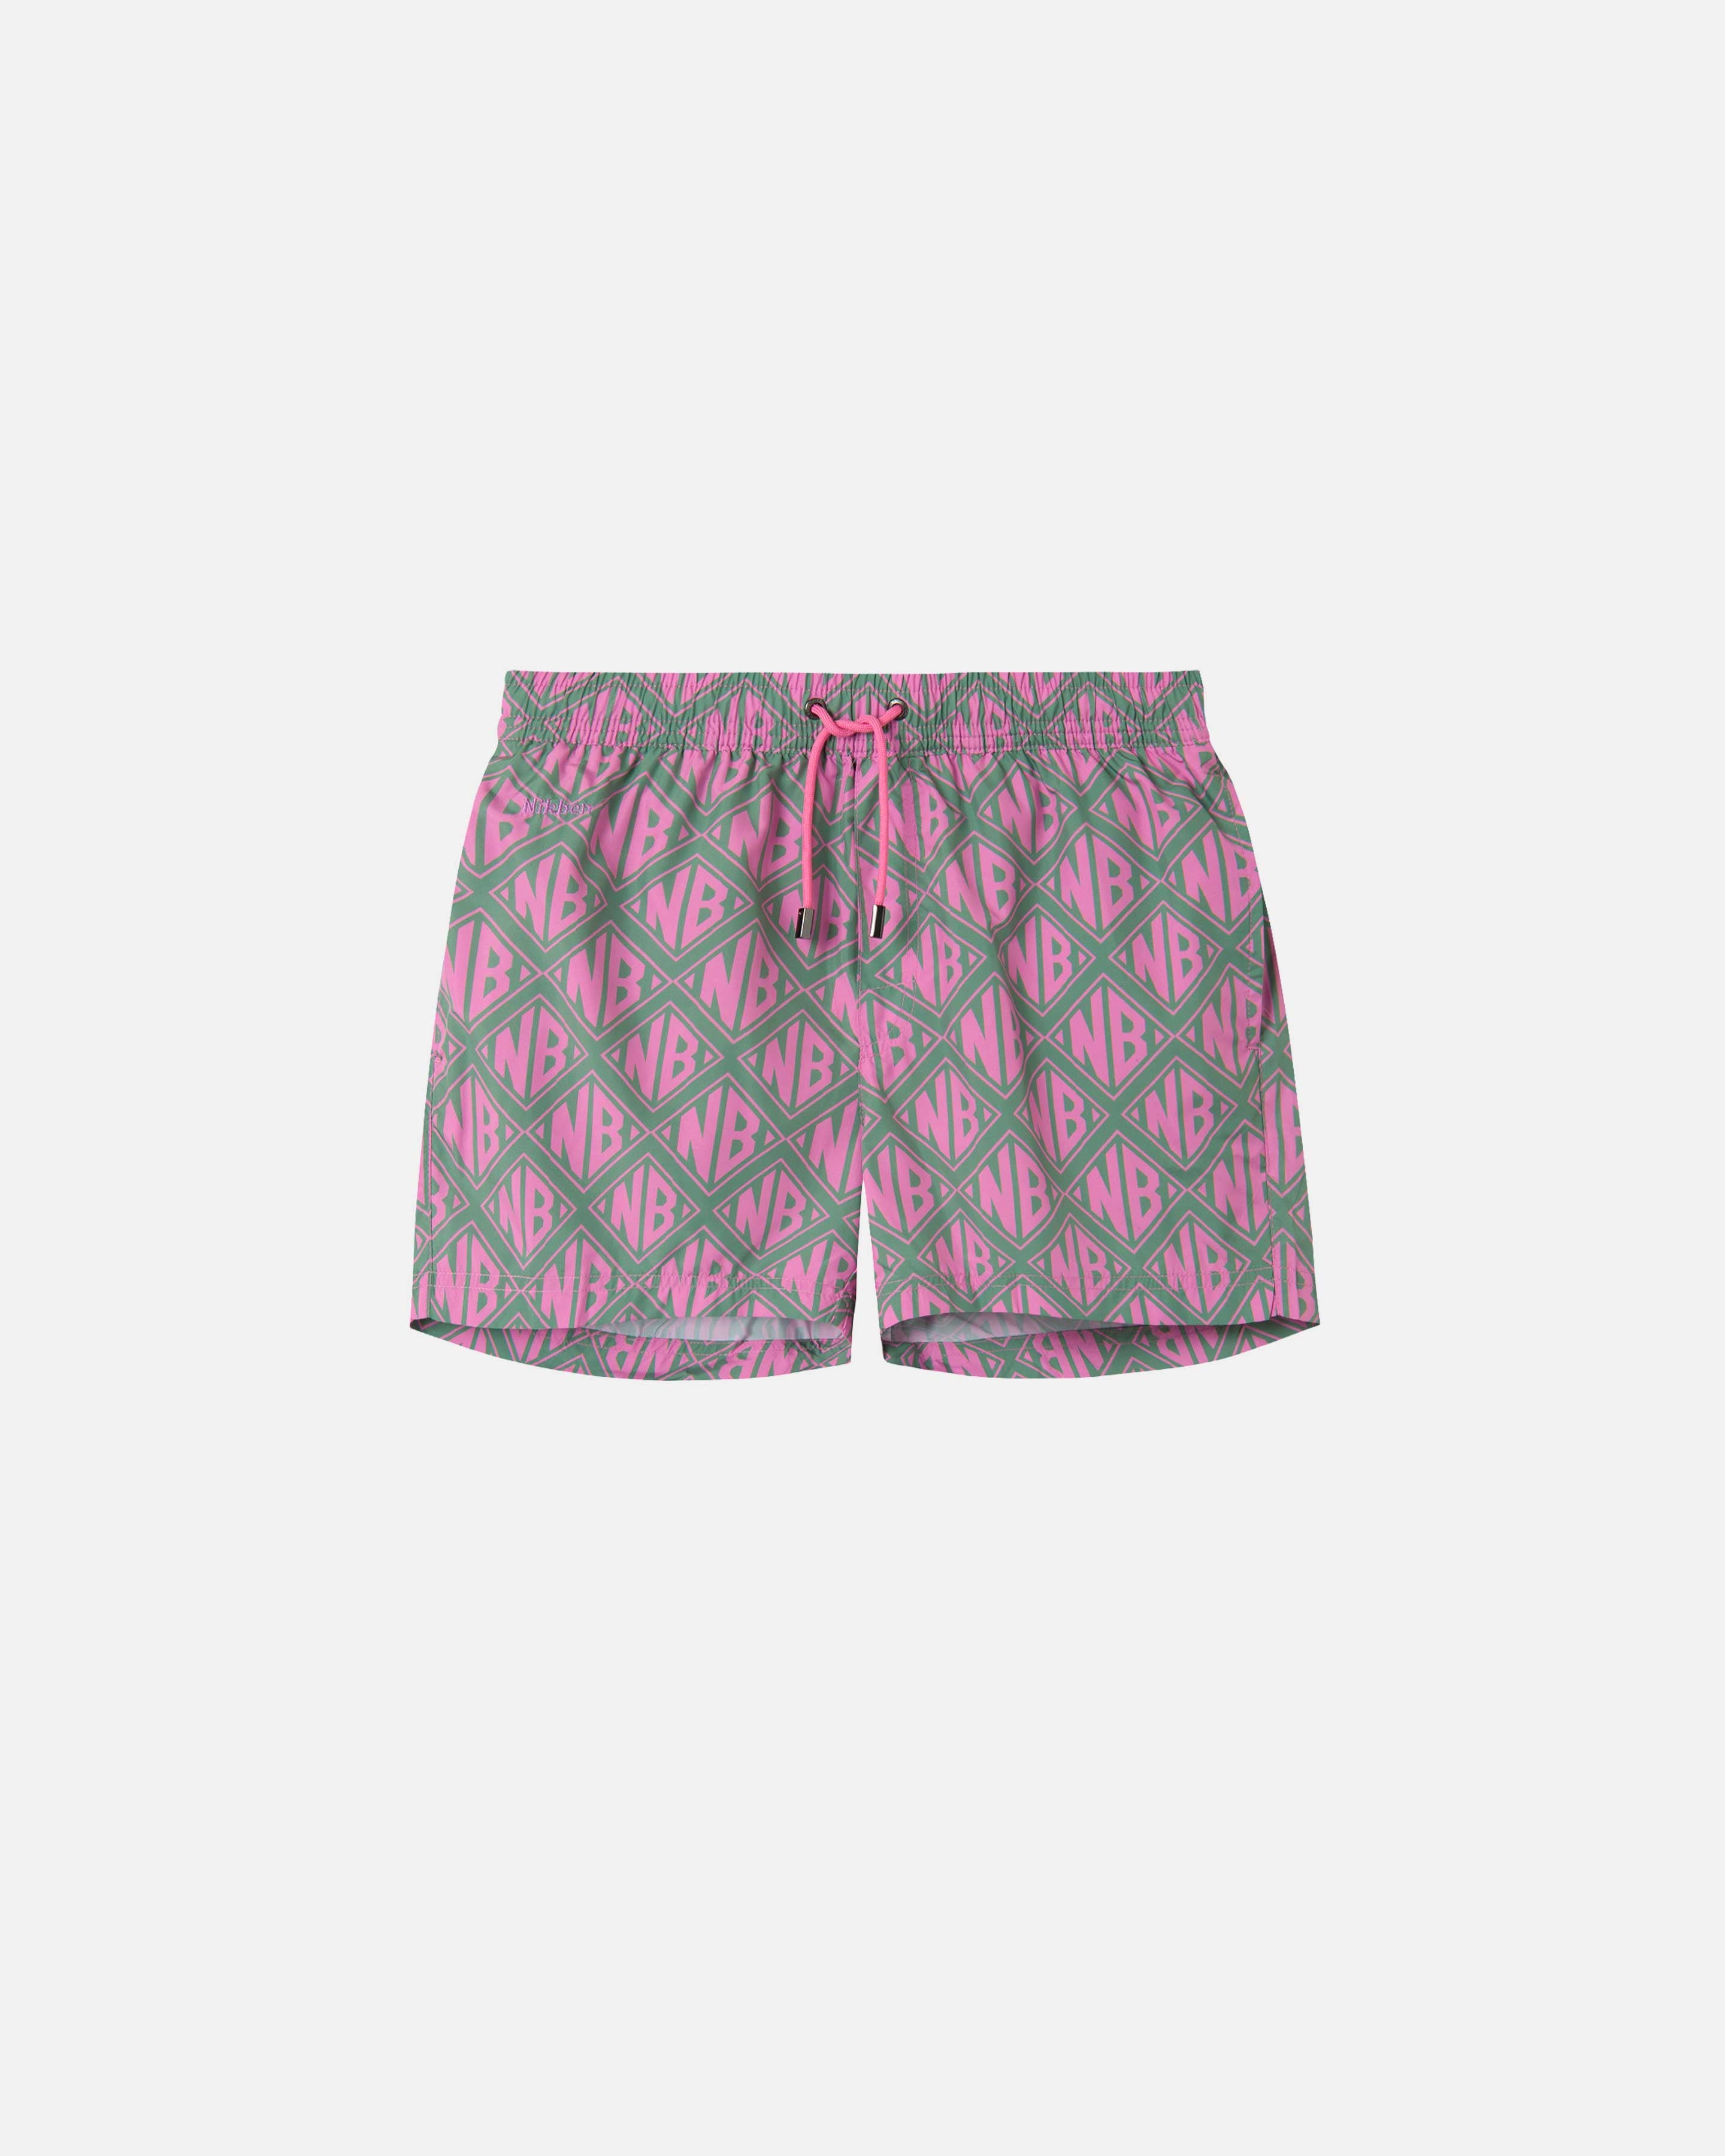 Olive and pink swim trunks with pink 